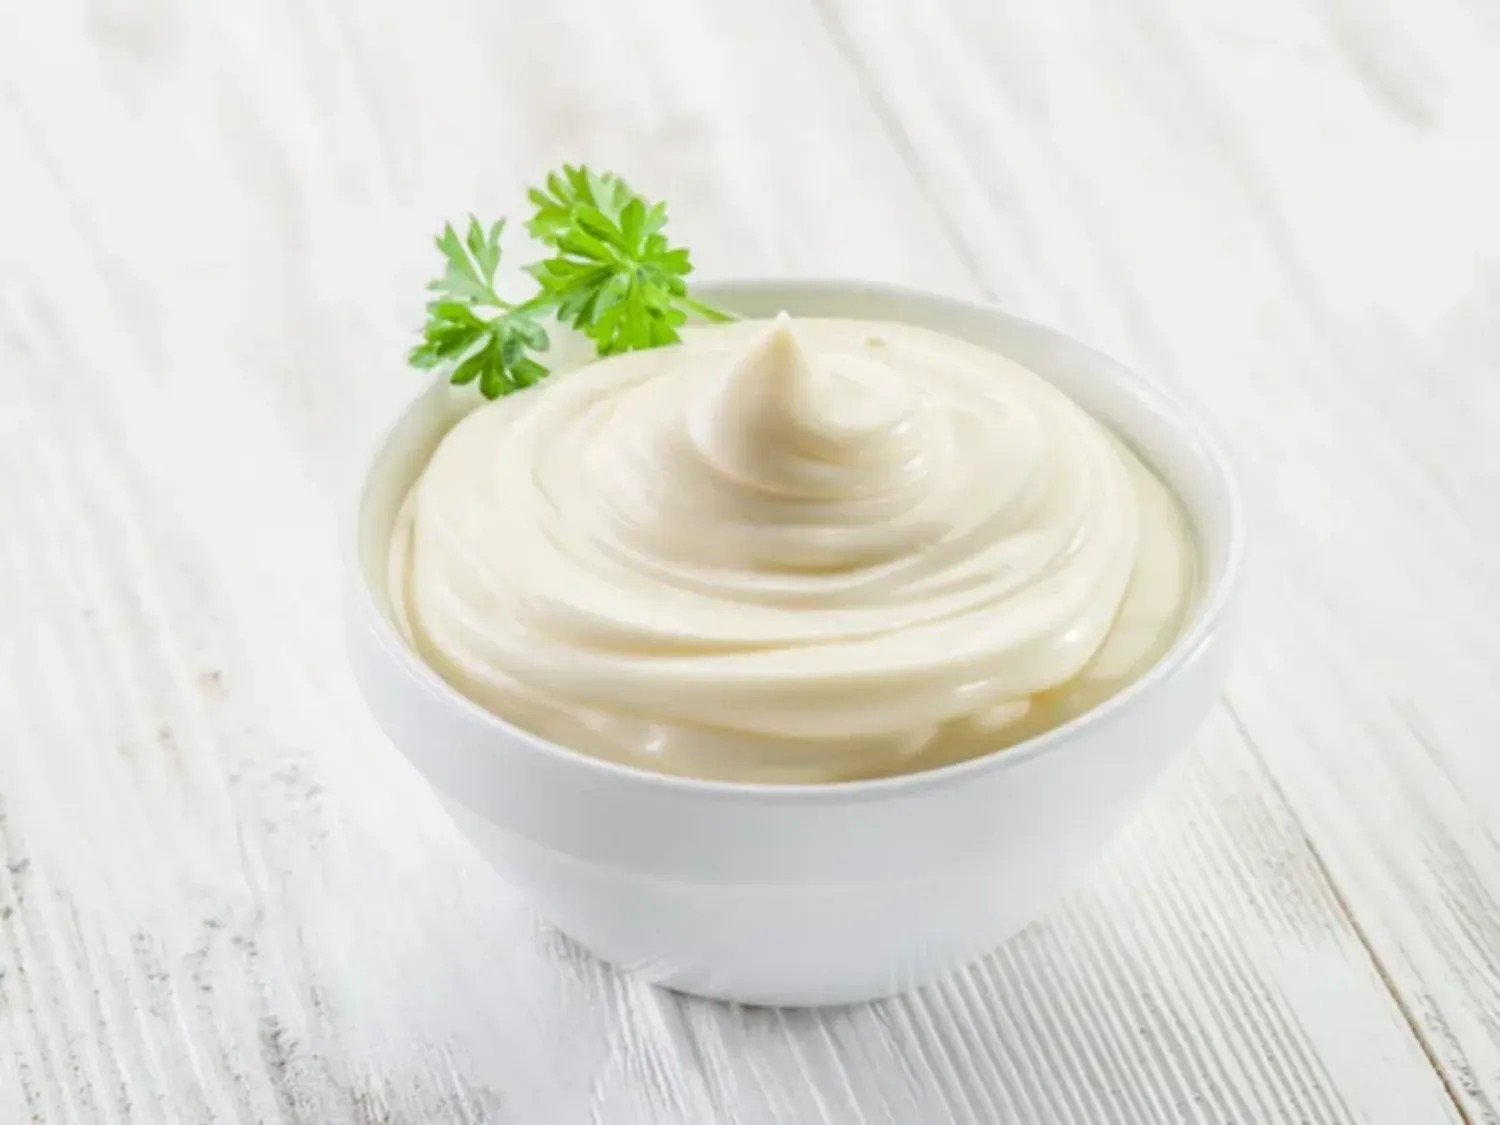 depositphotos 125845640 stock photo natural mayonnaise ingredients and the 1